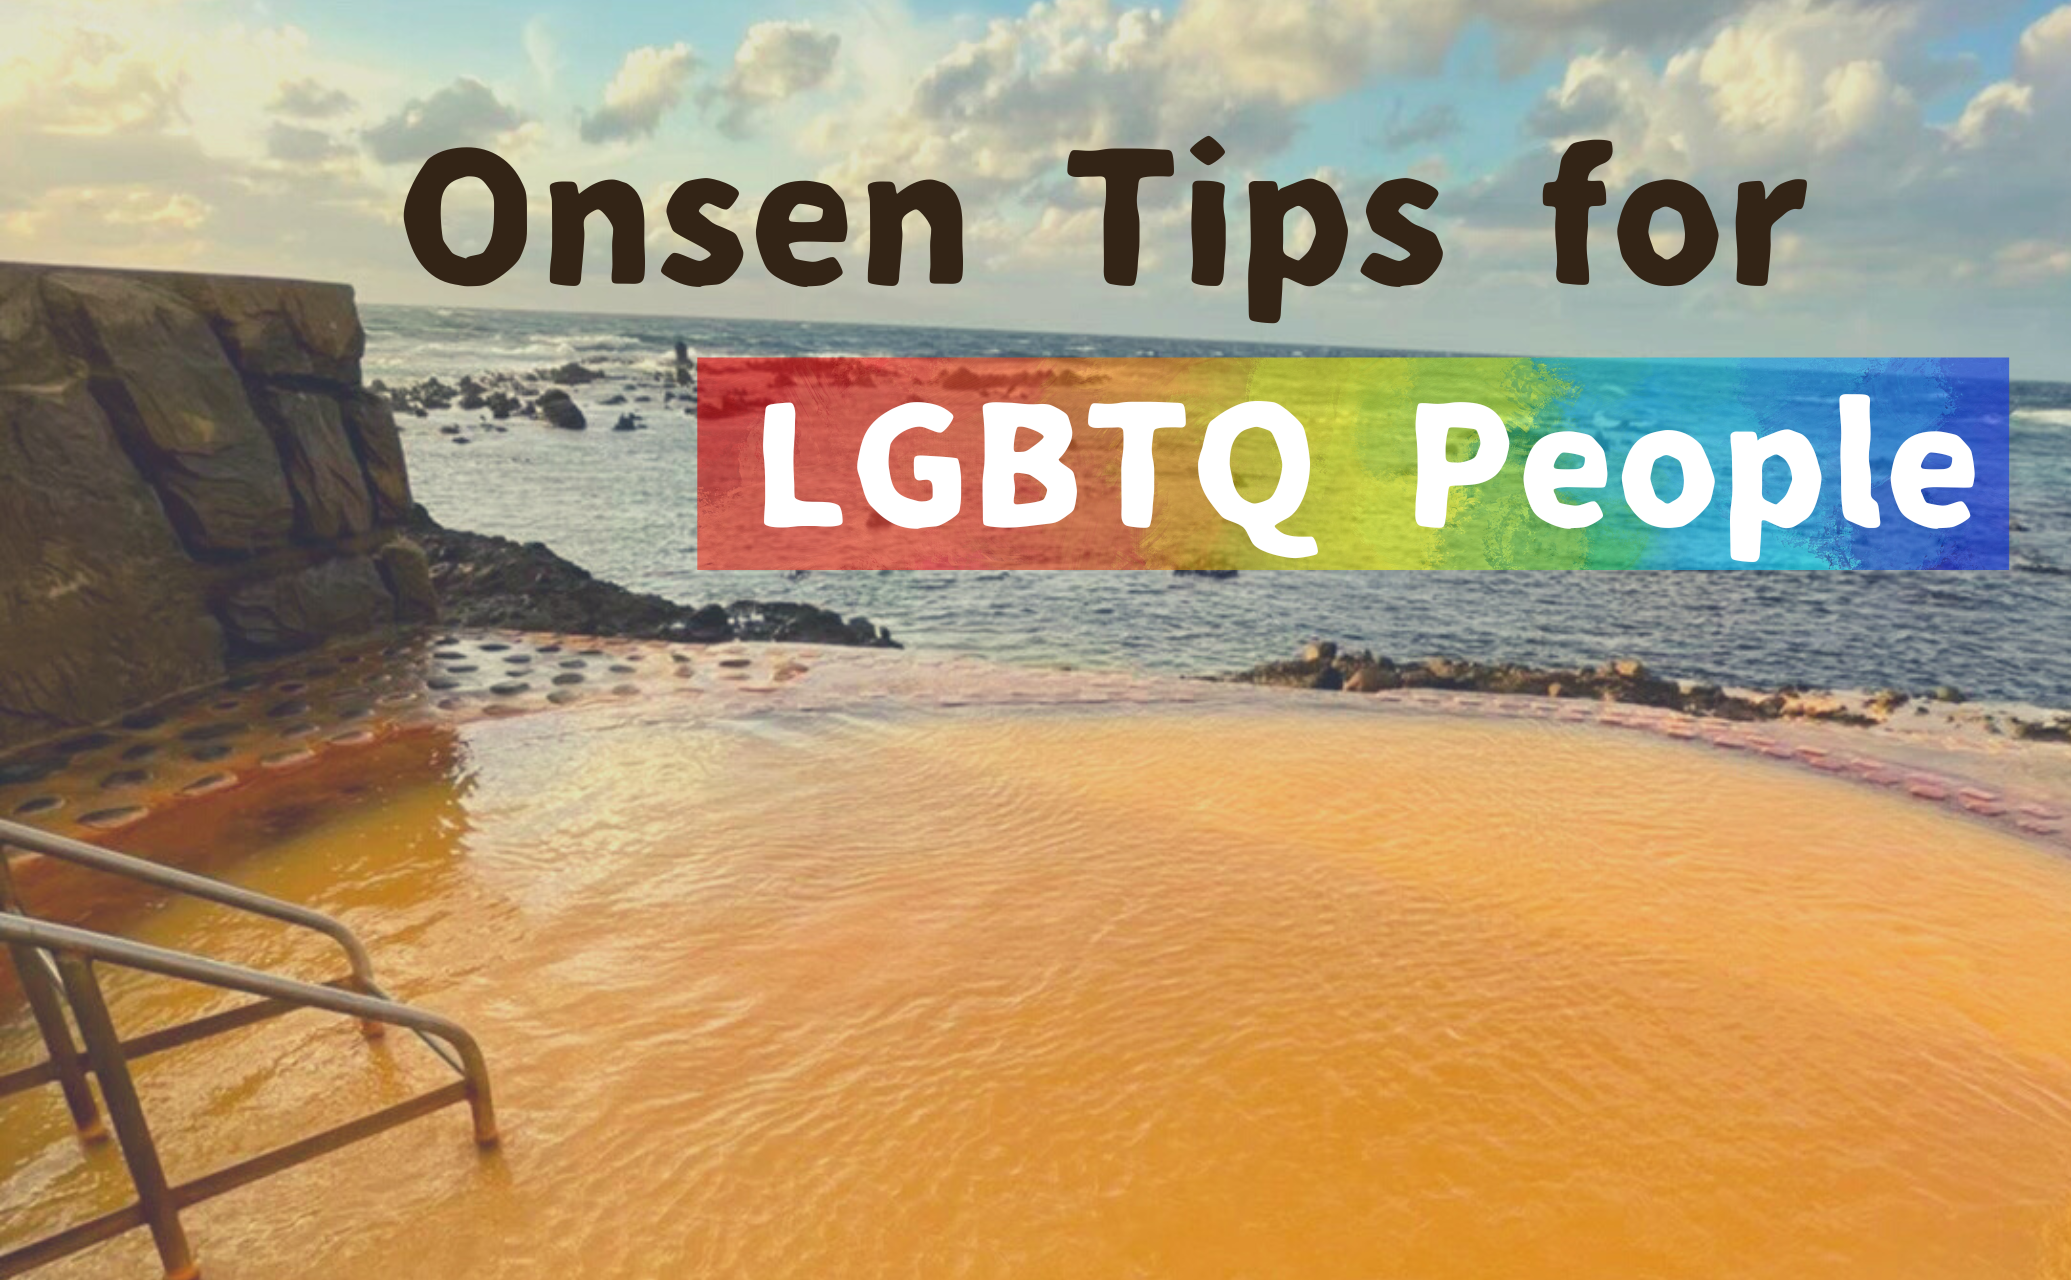 onsen tips for LGBTQ people